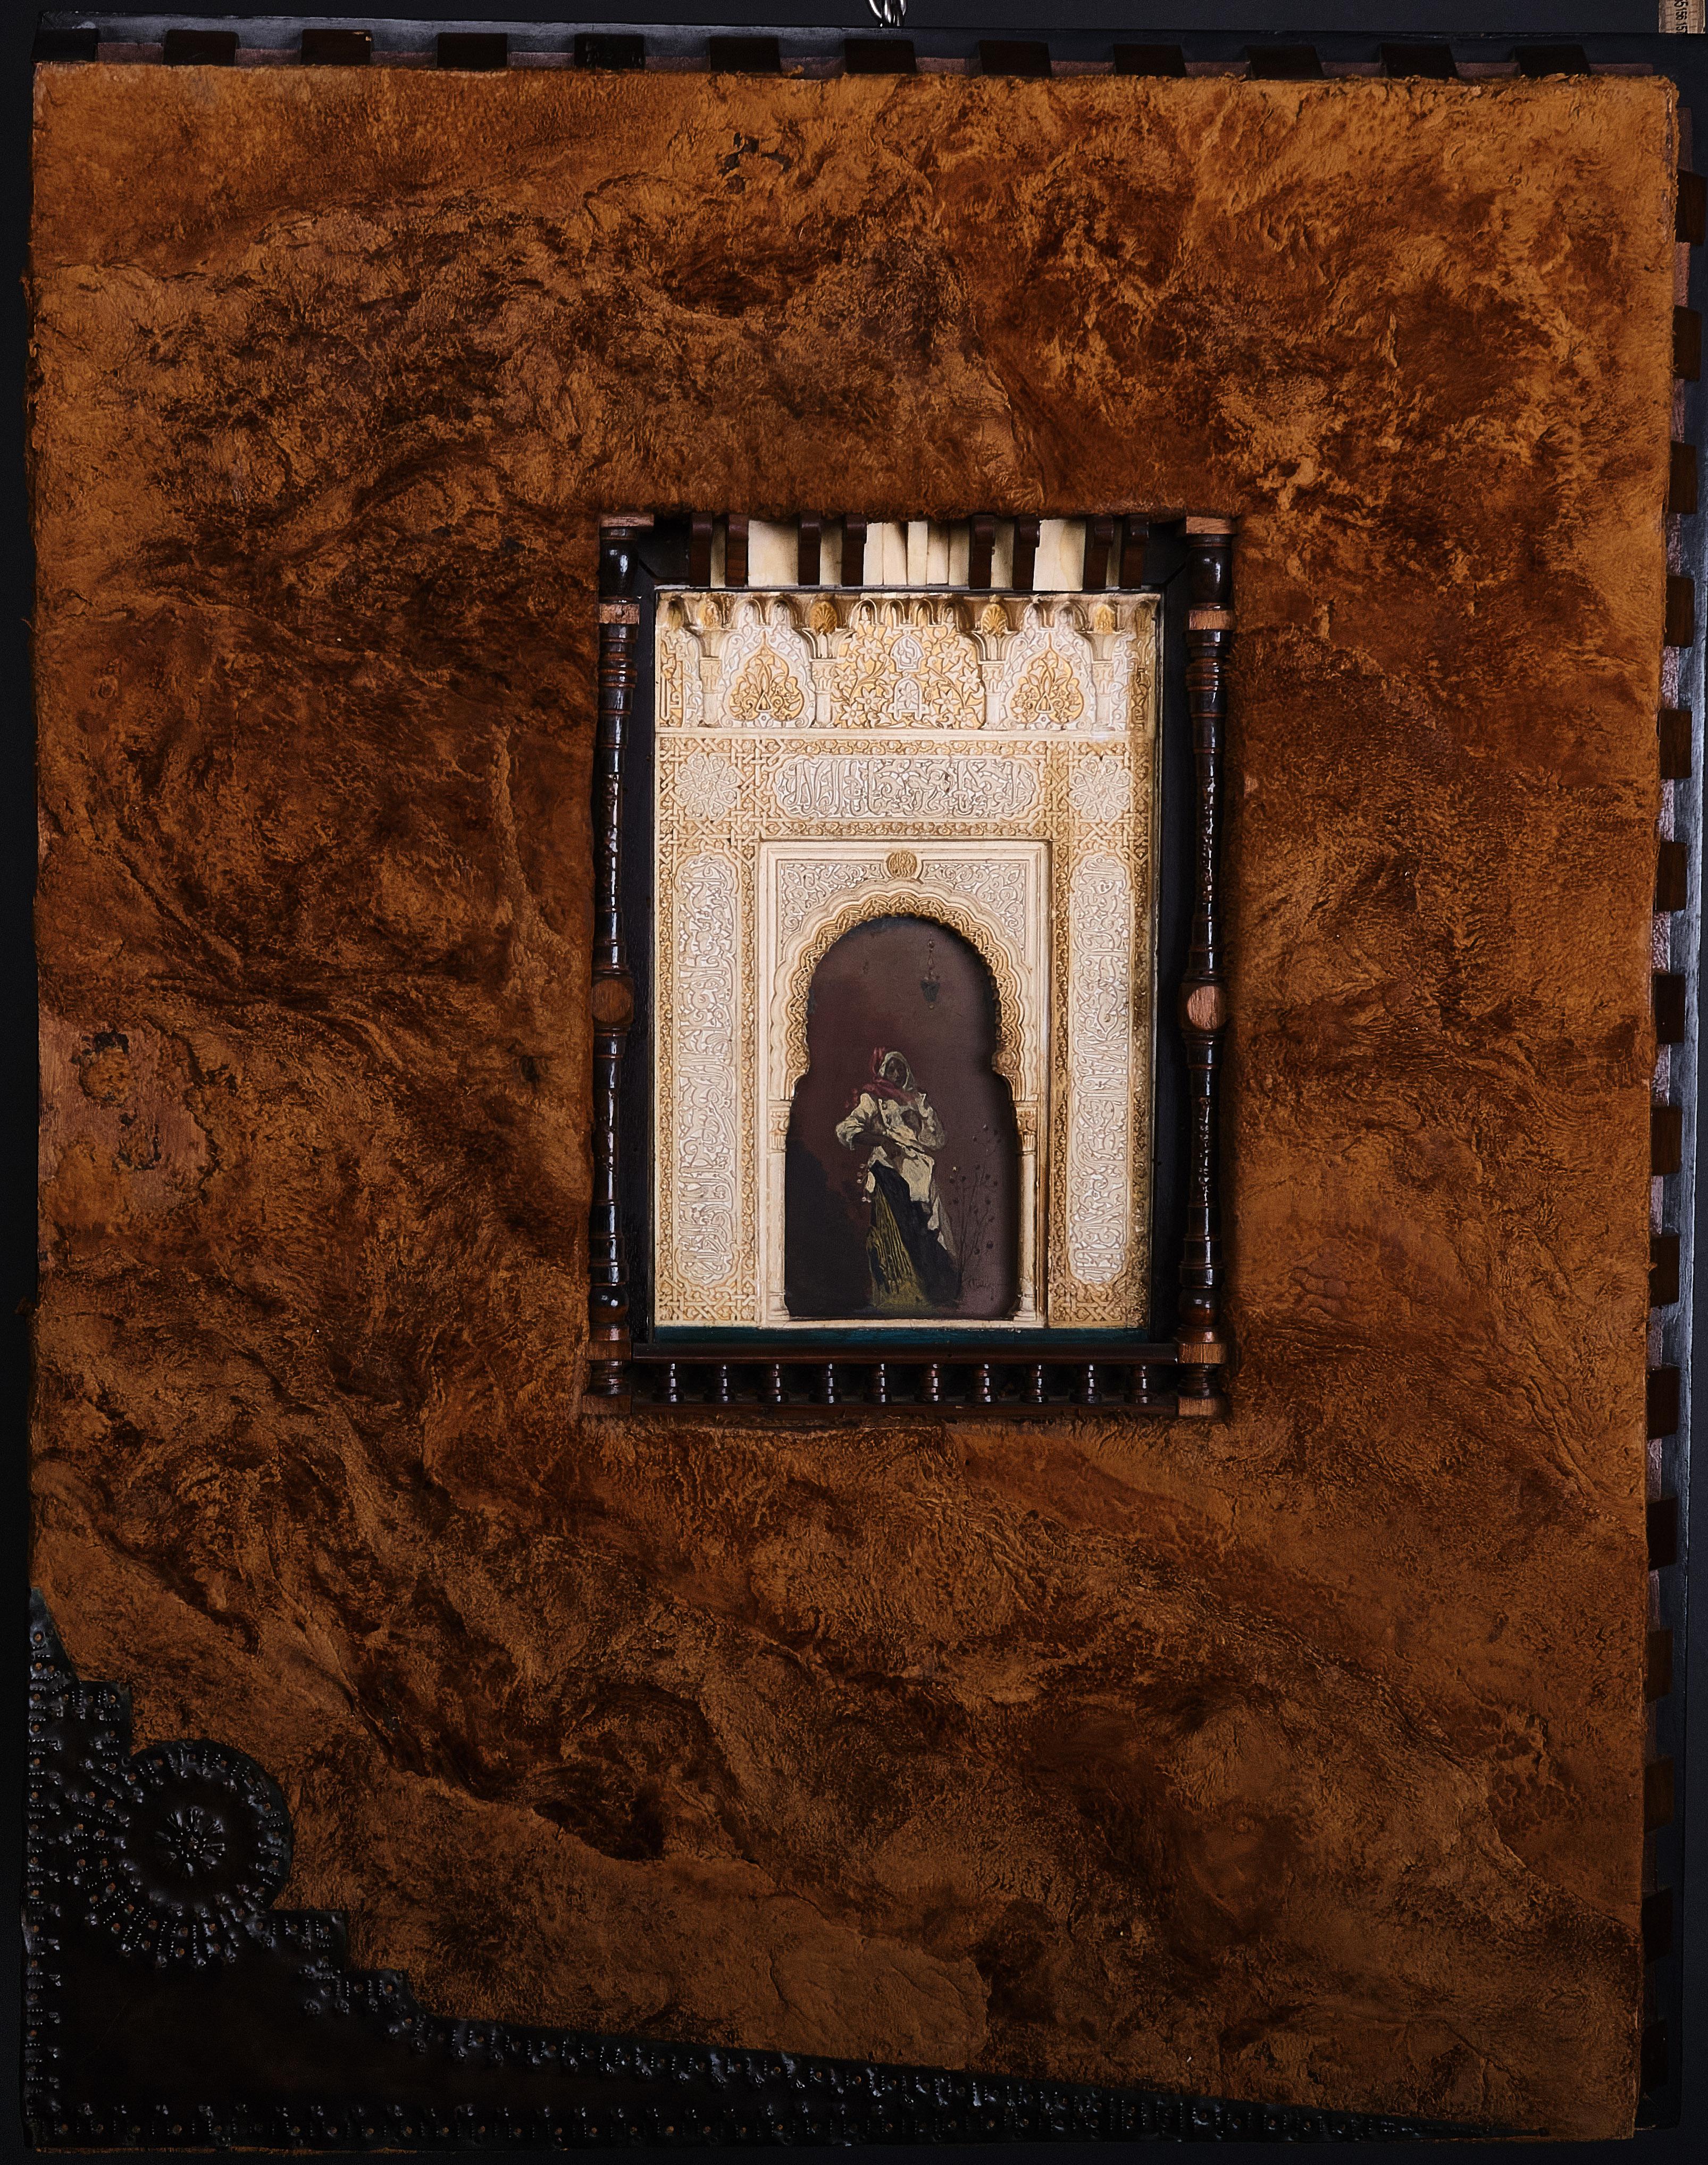 Extraordinary wall panel by Carlo Bugatti with an architectural relief by Enrique Linares (Granada since approx. 1870) and a guache by Alberto Pellegrini (Milan 1870-1943). Ebonized wood and walnut, with inlays as well as roughened, natural leather